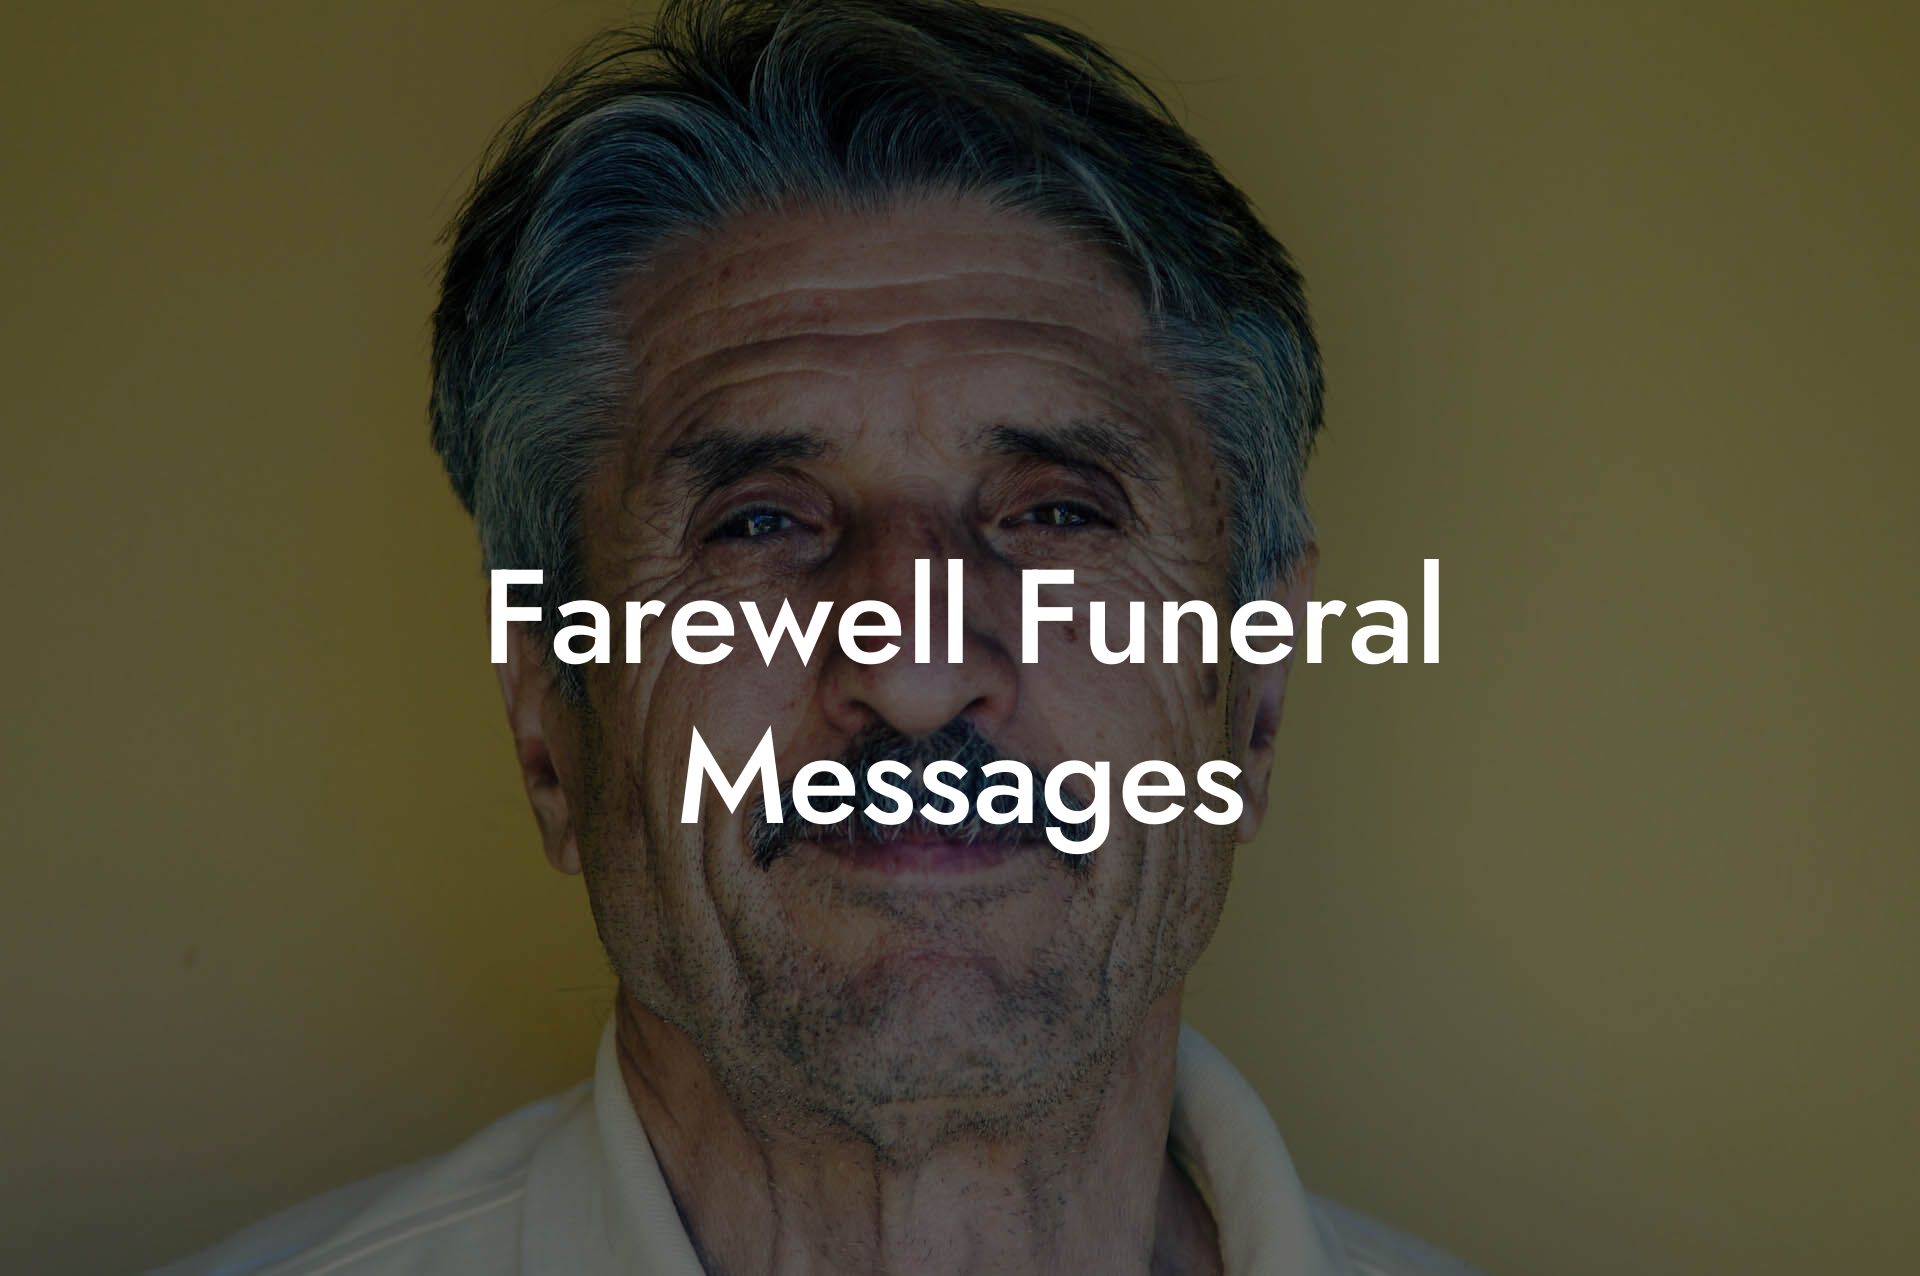 Farewell Funeral Messages